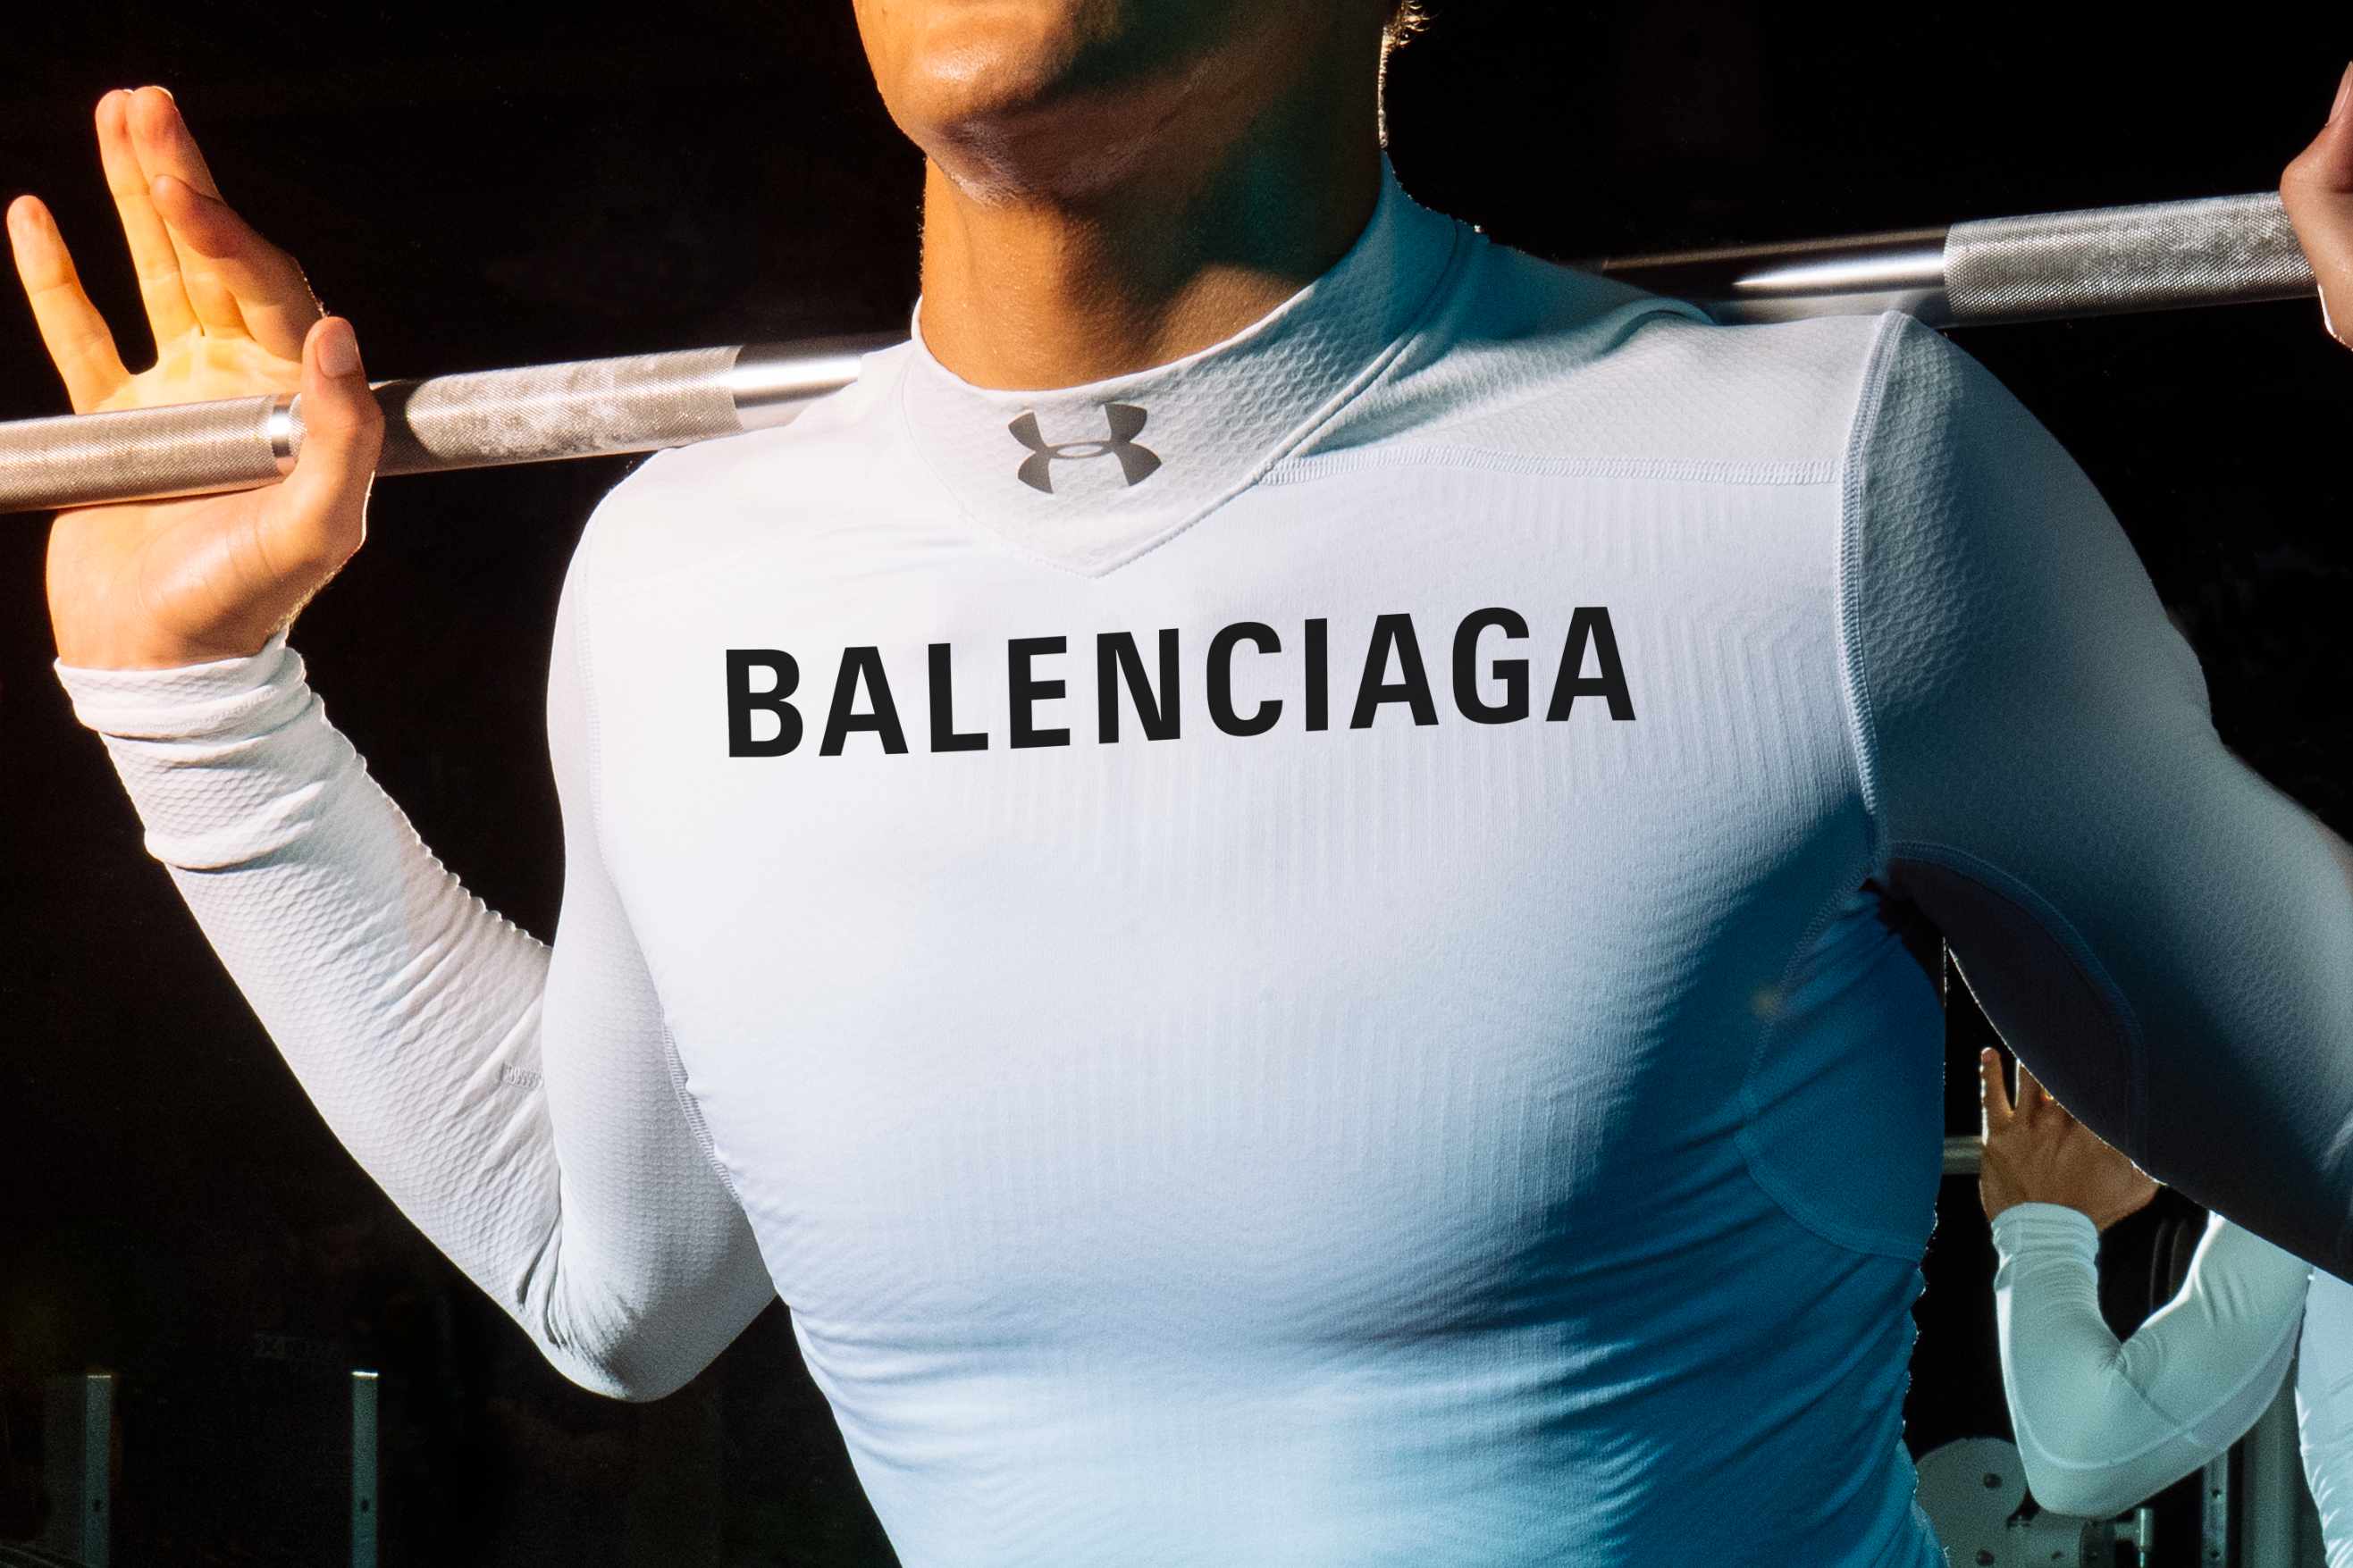 A weightlifter wears a shirt printed with Under Armour and Balenciaga logos